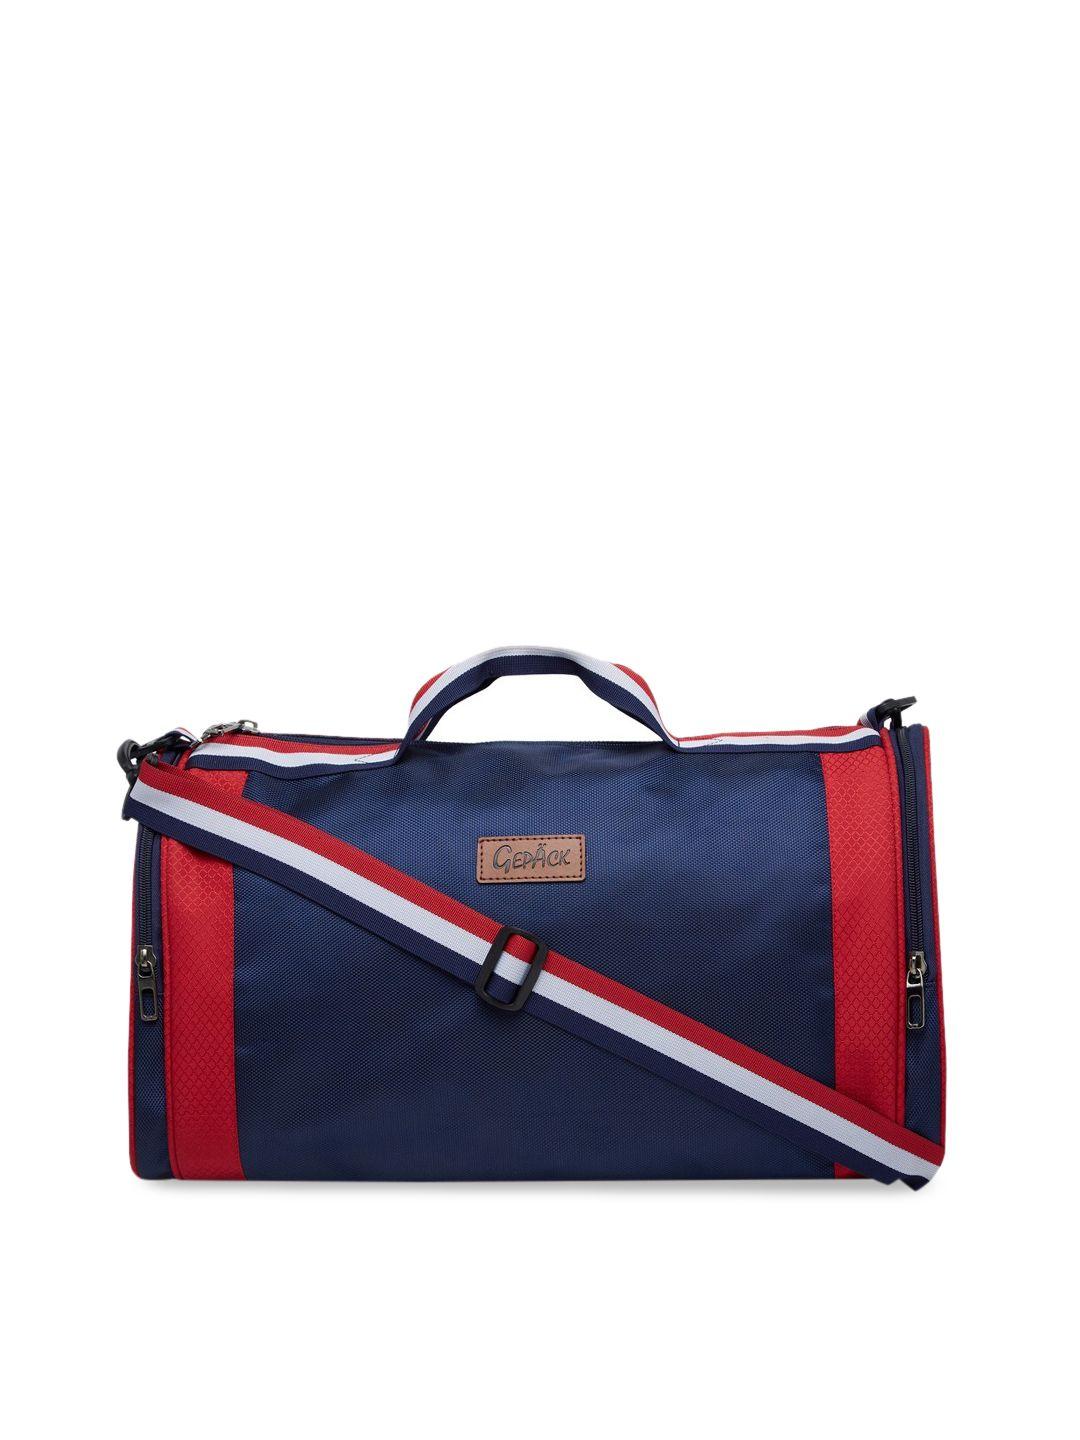 gepack-by-bagsrus-polyester-52-cms-navy-blue-duffel-travel-bag